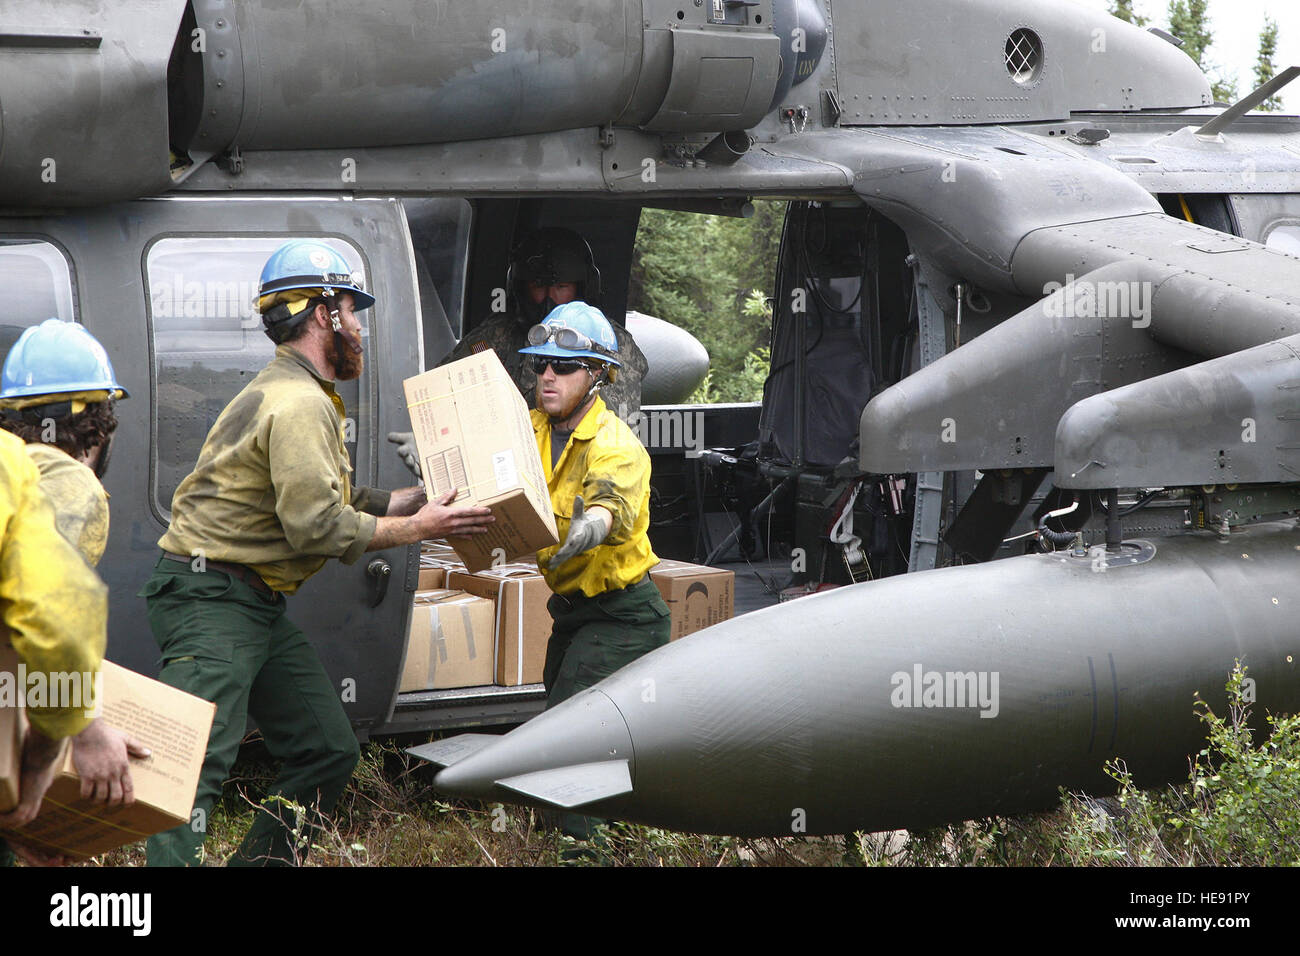 Wantana, ALASKA – Members of the U.S. Forest Service’s Lassen Interagency Hotshot Crew (IHC) of Susanville, Calif., load supplies onto an Alaska Army National Guard UH-60L Blackhawk helicopter during extraction operations, June 30, 2013.  The 21-member IHC was transported back to Palmer after completing containment and mop-up operations of the 40-acre wildfire.  Percy G. Jones) Stock Photo